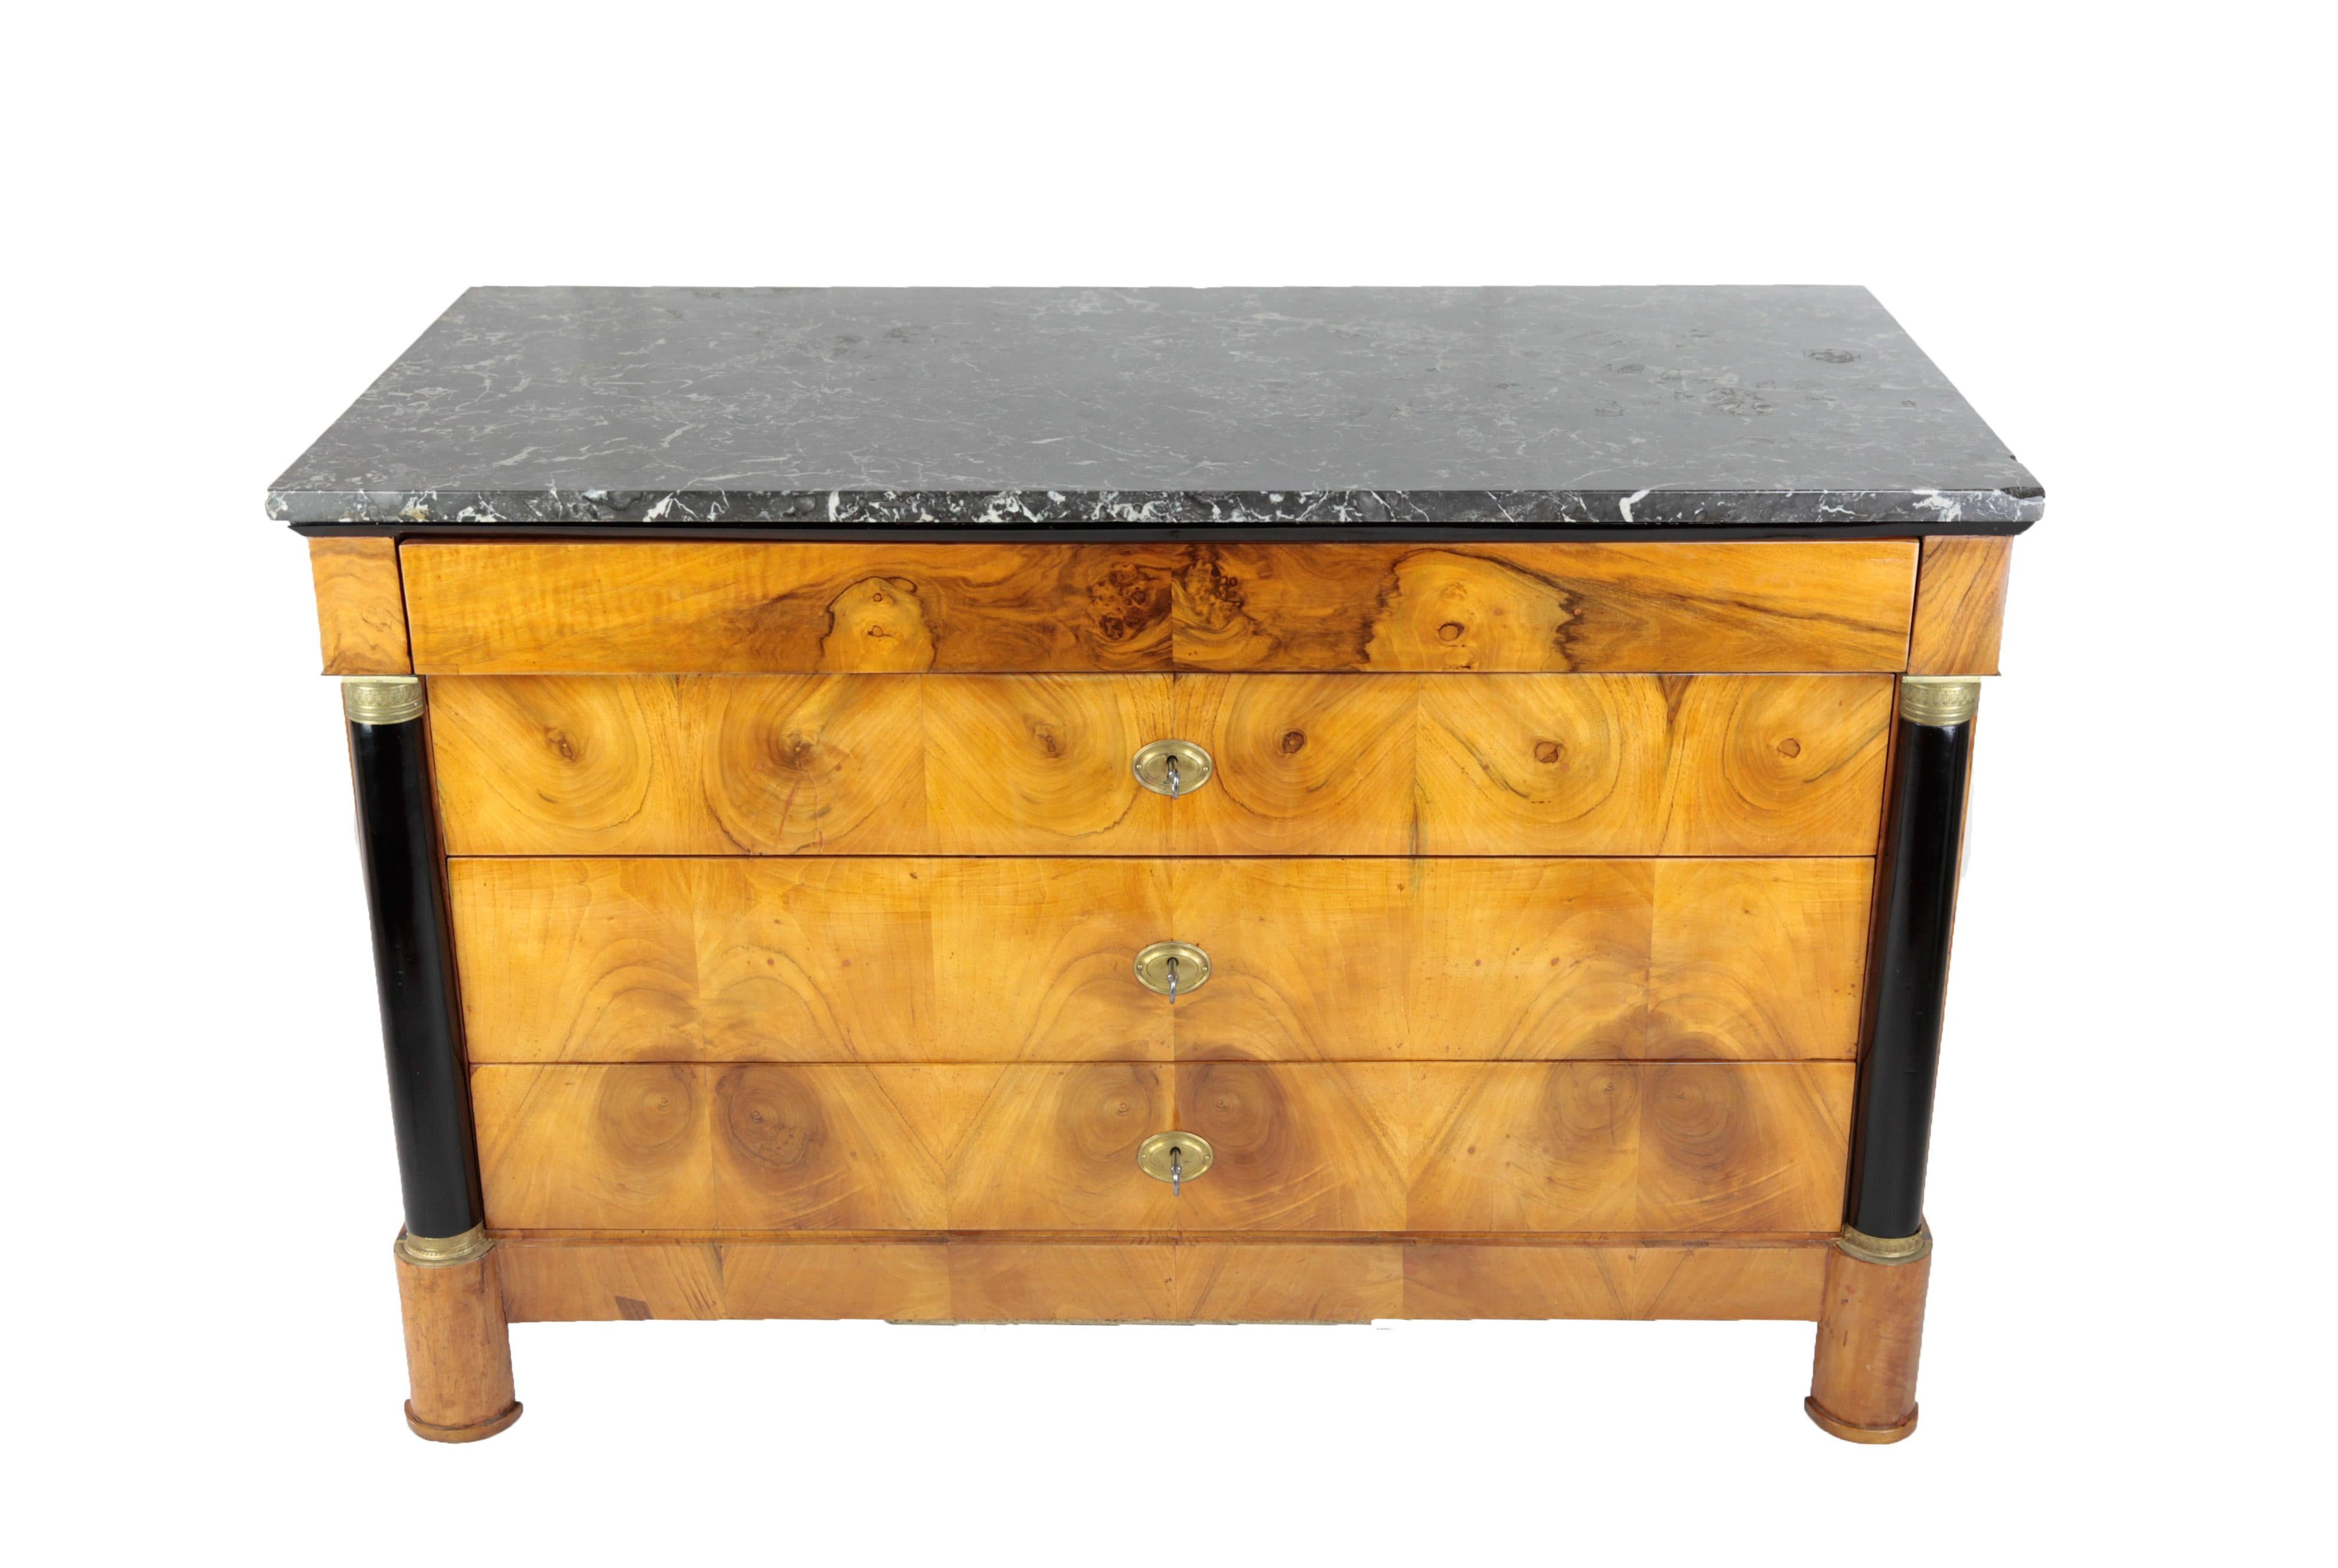 The Biedermeier chest of drawers with 4 drawers, designed in a straight line with ebonized columns with brass mountings, was created circa 1820 in France. The drawers differ in size, the top drawer is slightly smaller and created as a hidden drawer,